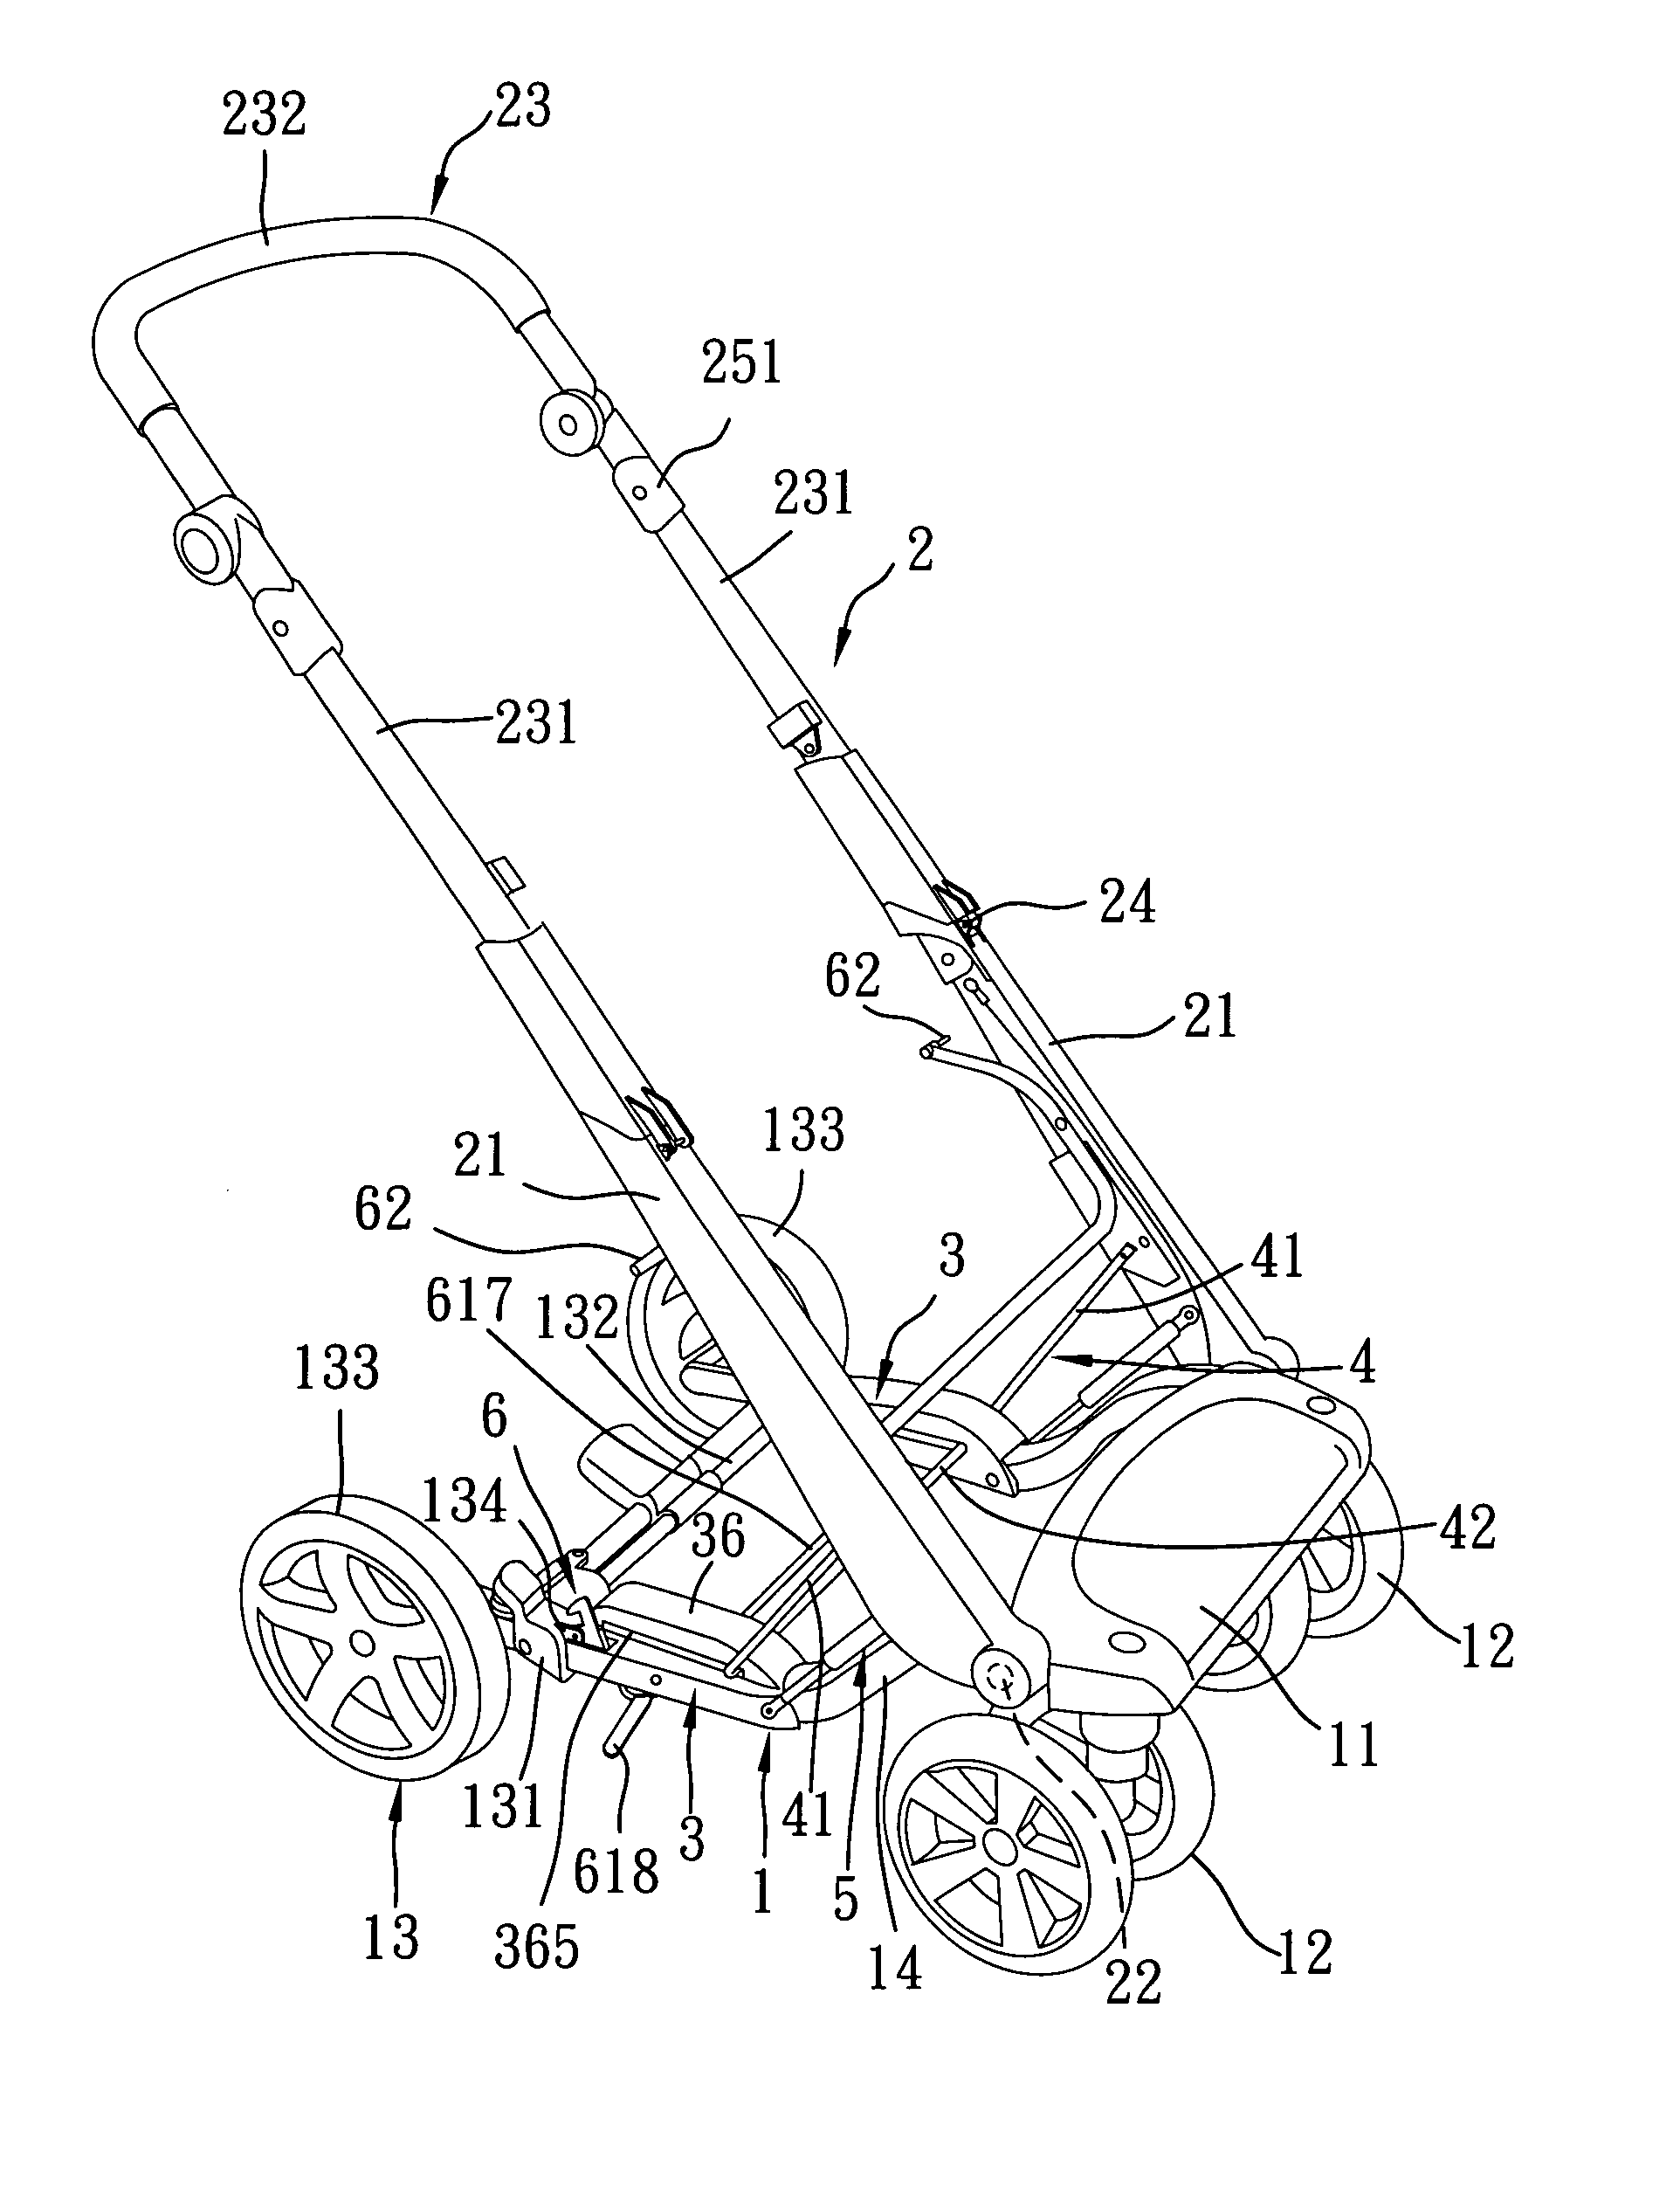 Automatically unfoldable stroller